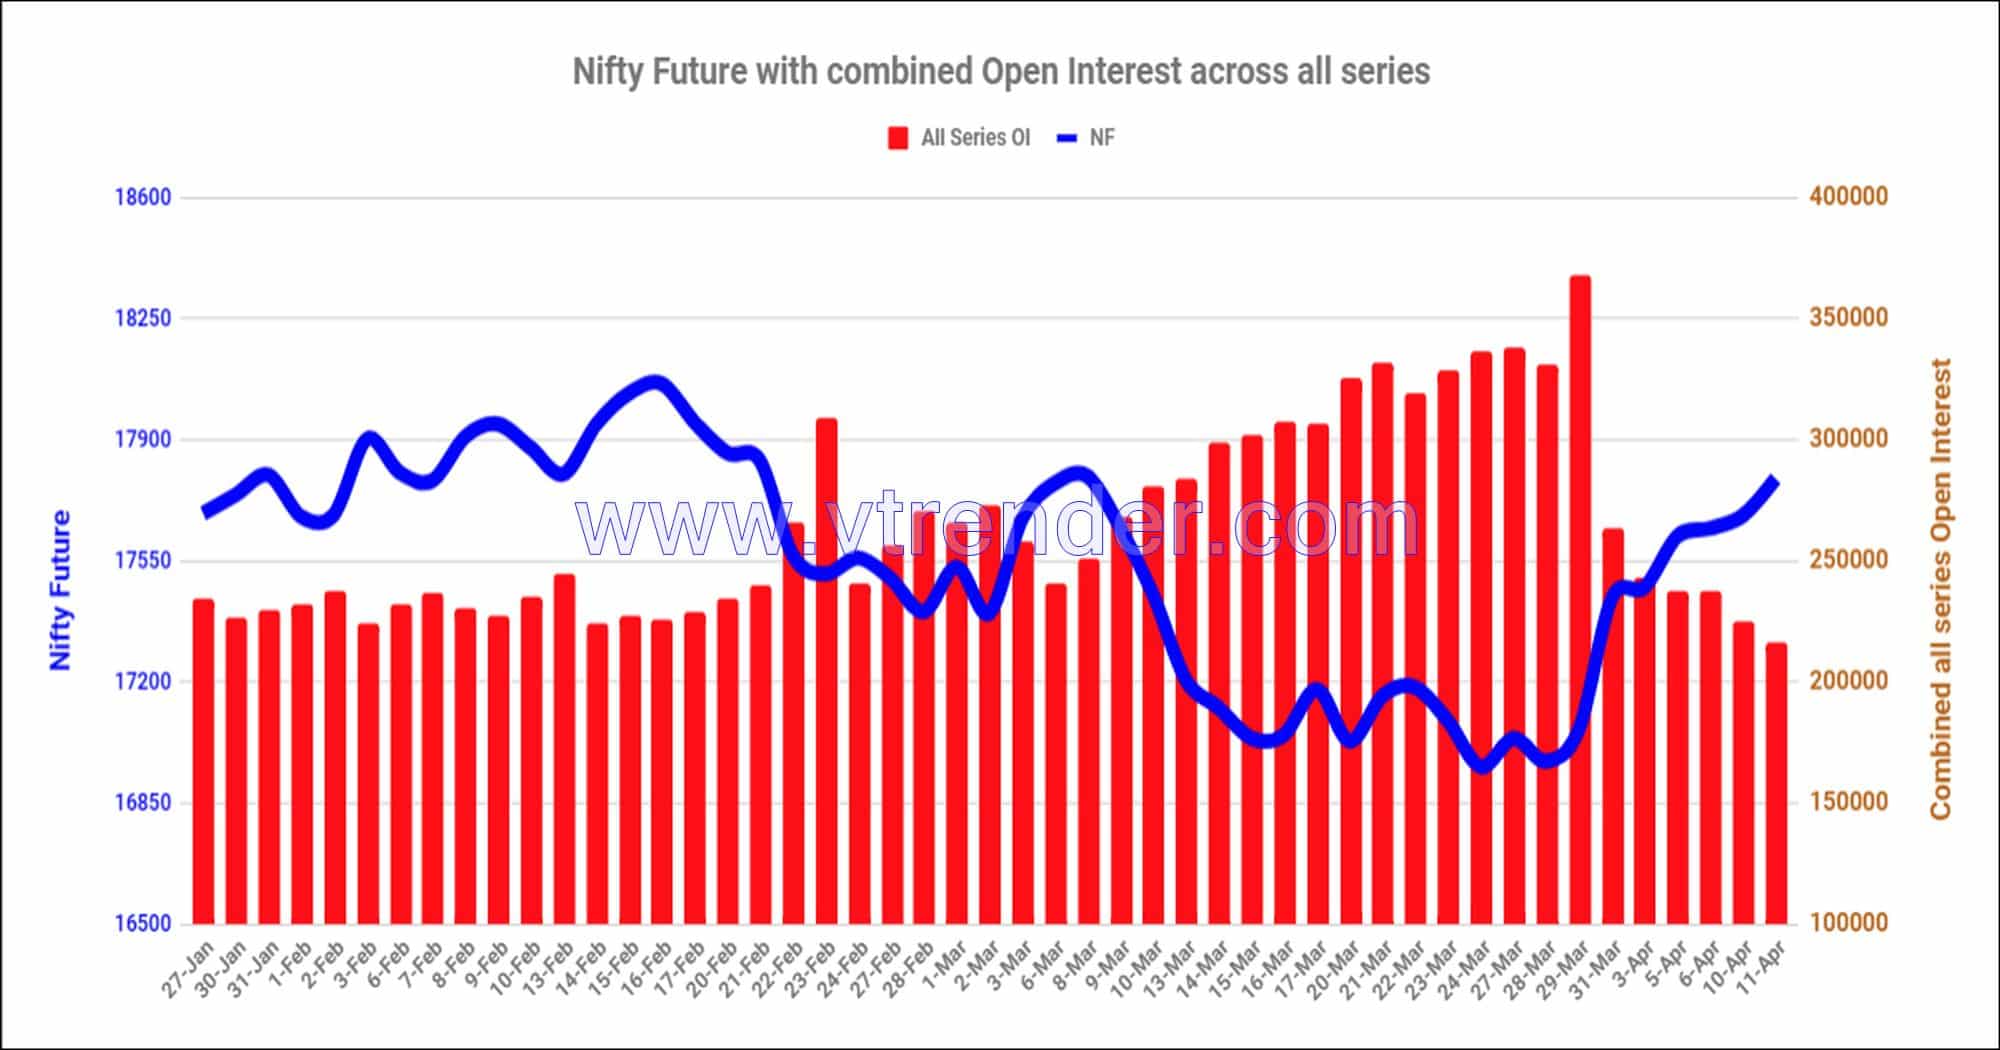 Nf11Apr Nifty And Banknifty Futures With All Series Combined Open Interest – 11Th Apr 2023 Banknifty, Nifty, Open Interest